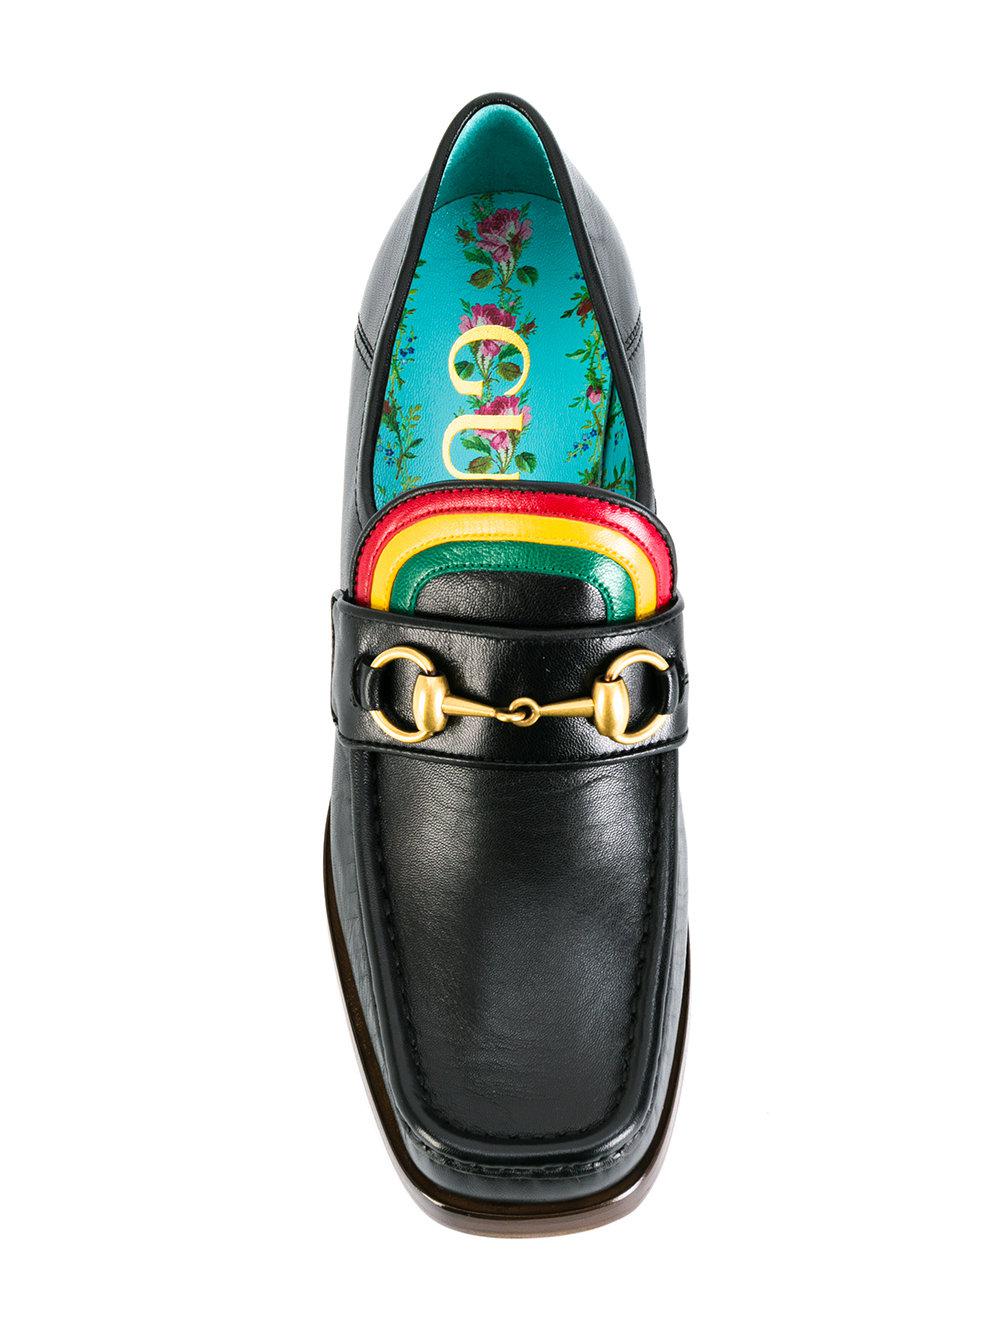 rainbow gucci loafers